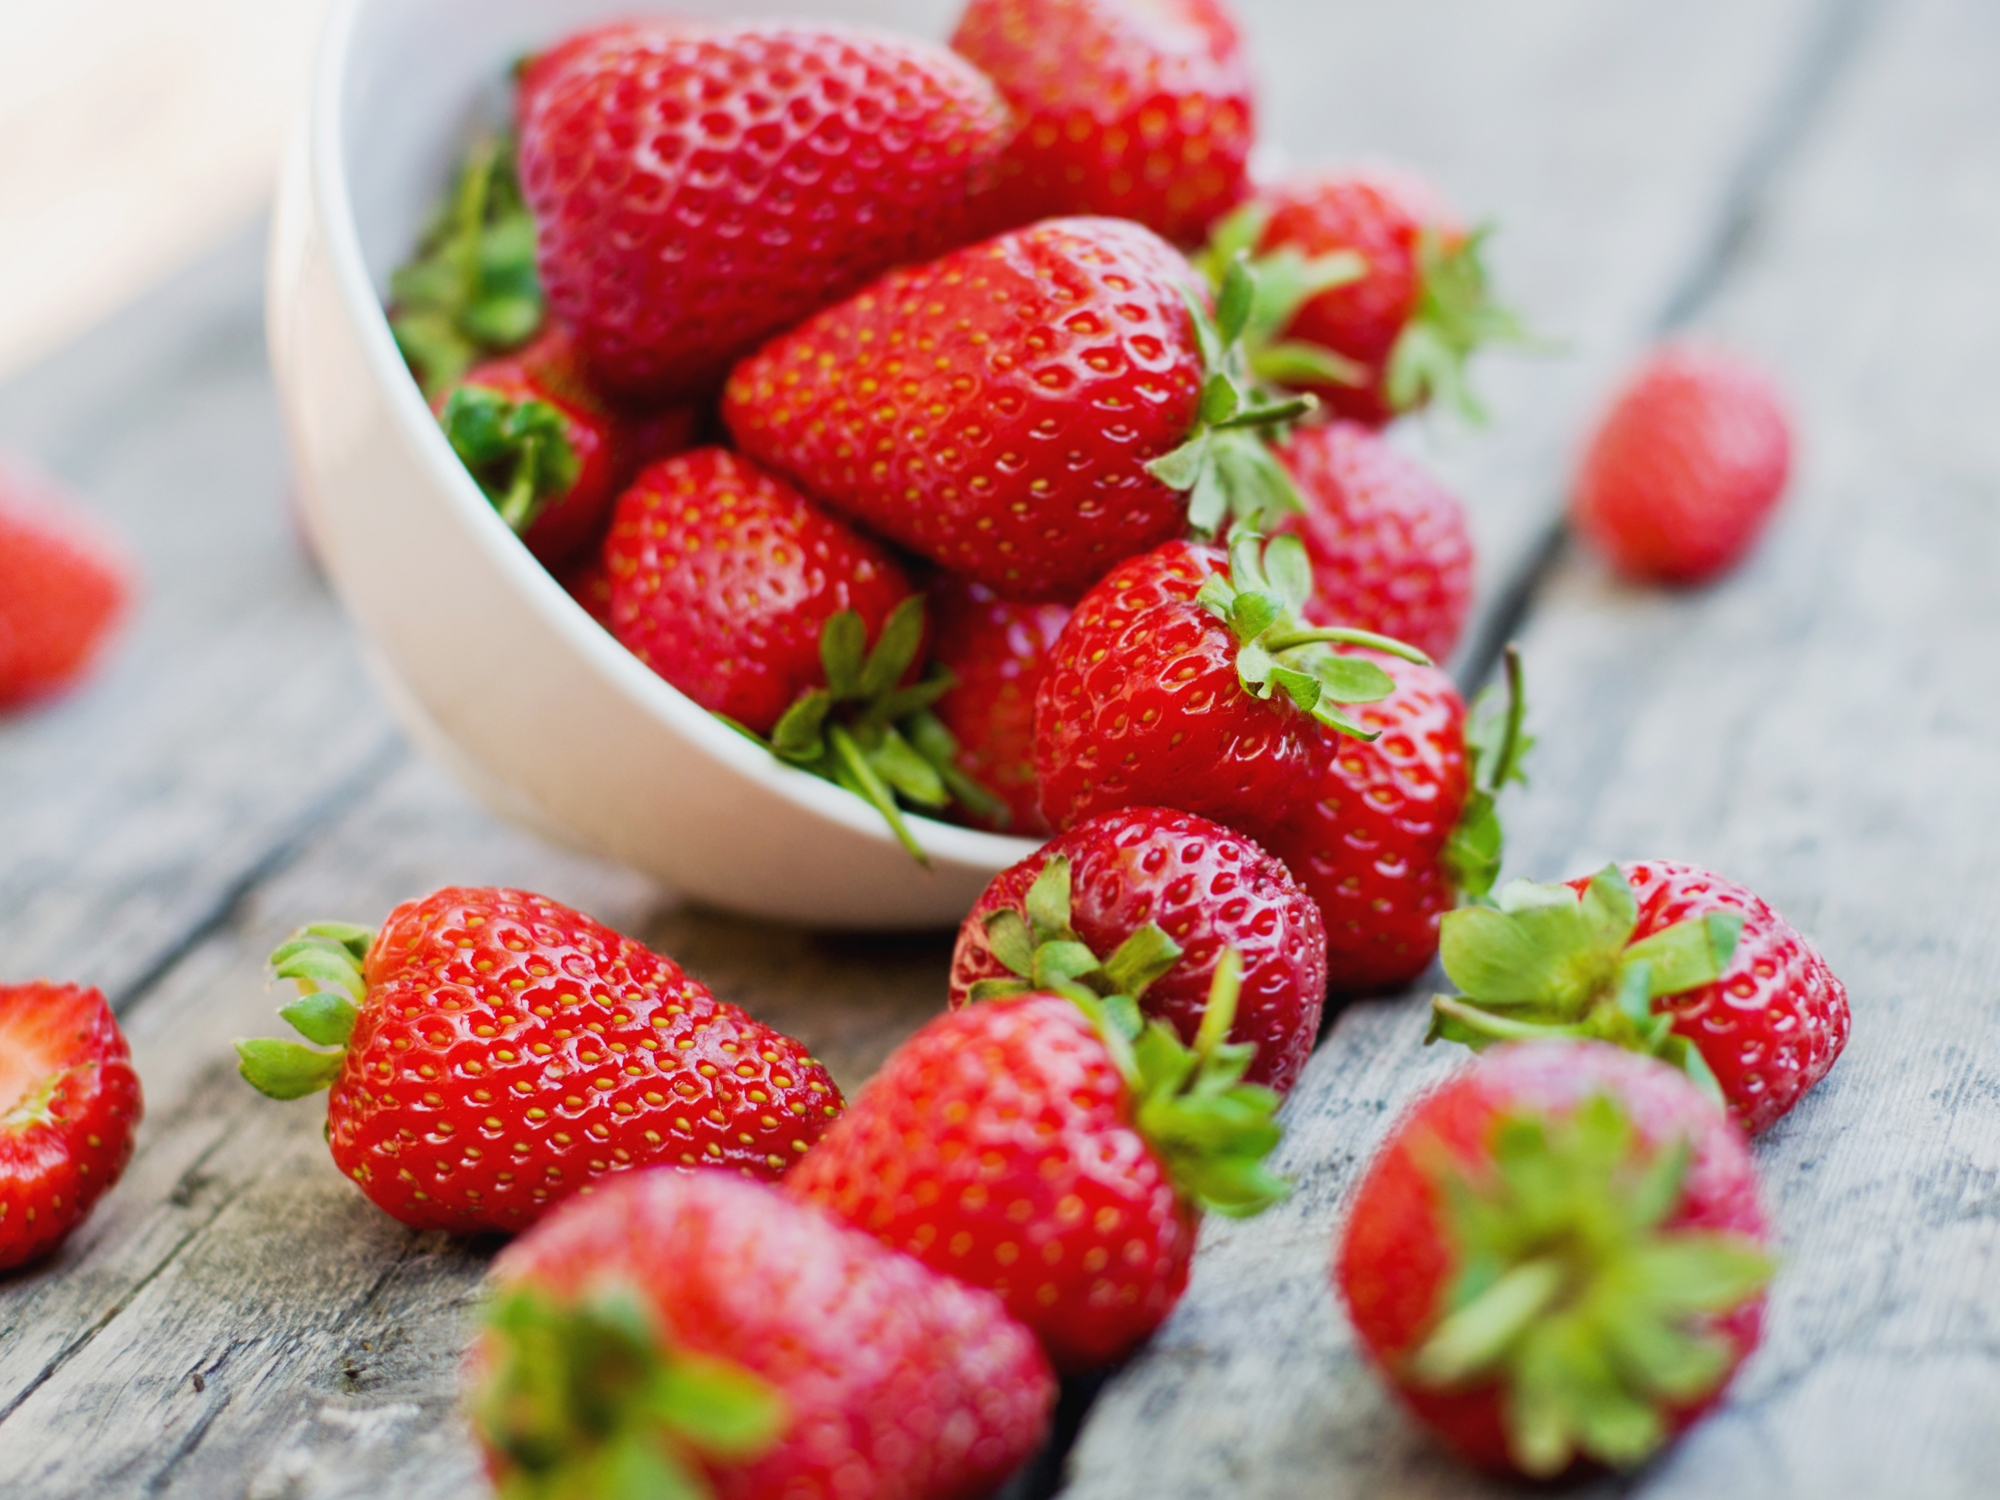 Colon pain and inflammation? You need strawberries